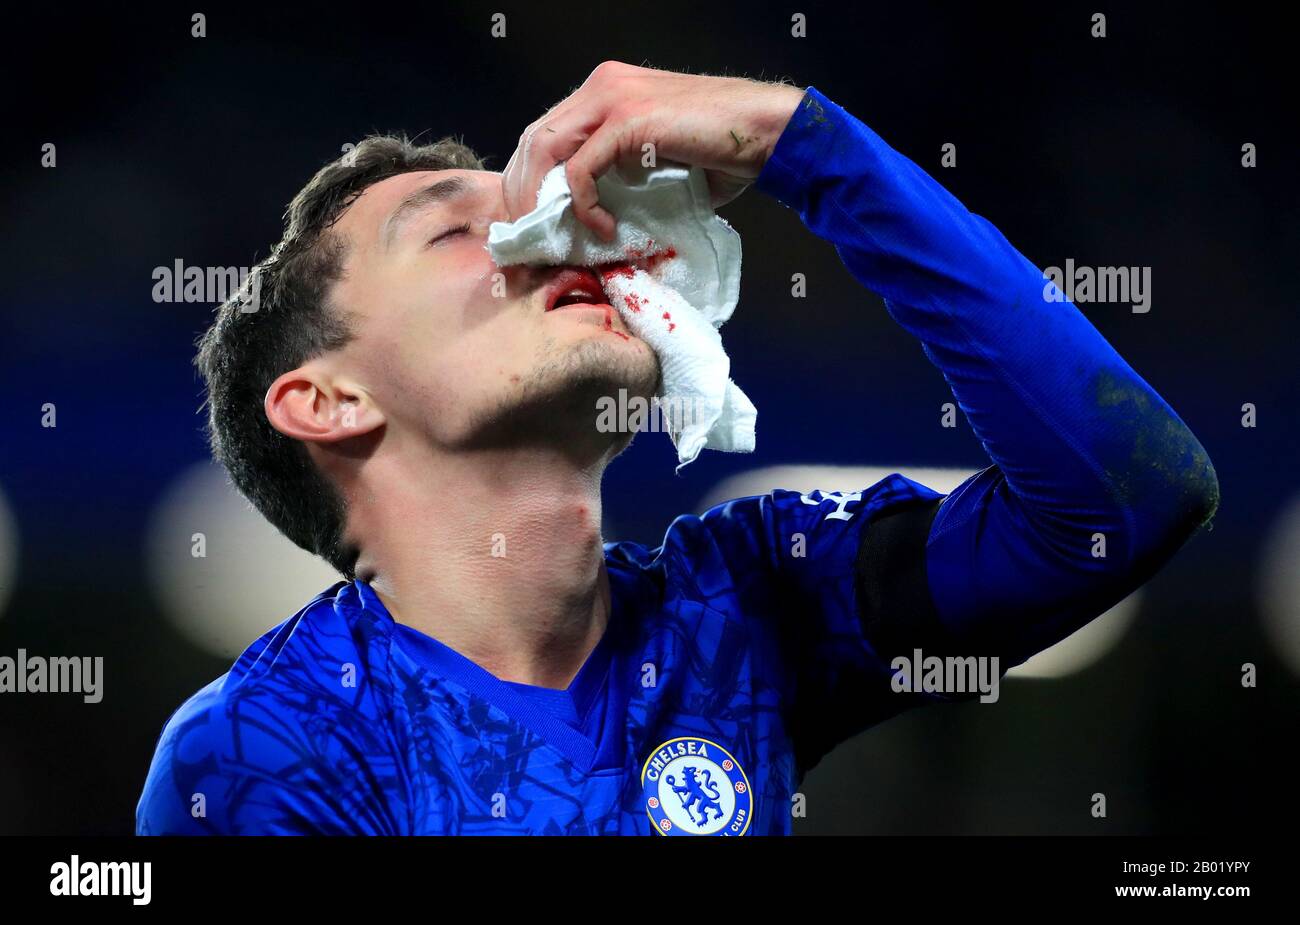 Chelsea's Andreas Christensen tilts his head back to stop a nose bleed after picking up an injury during the Premier League match at Stamford Bridge, London. Stock Photo